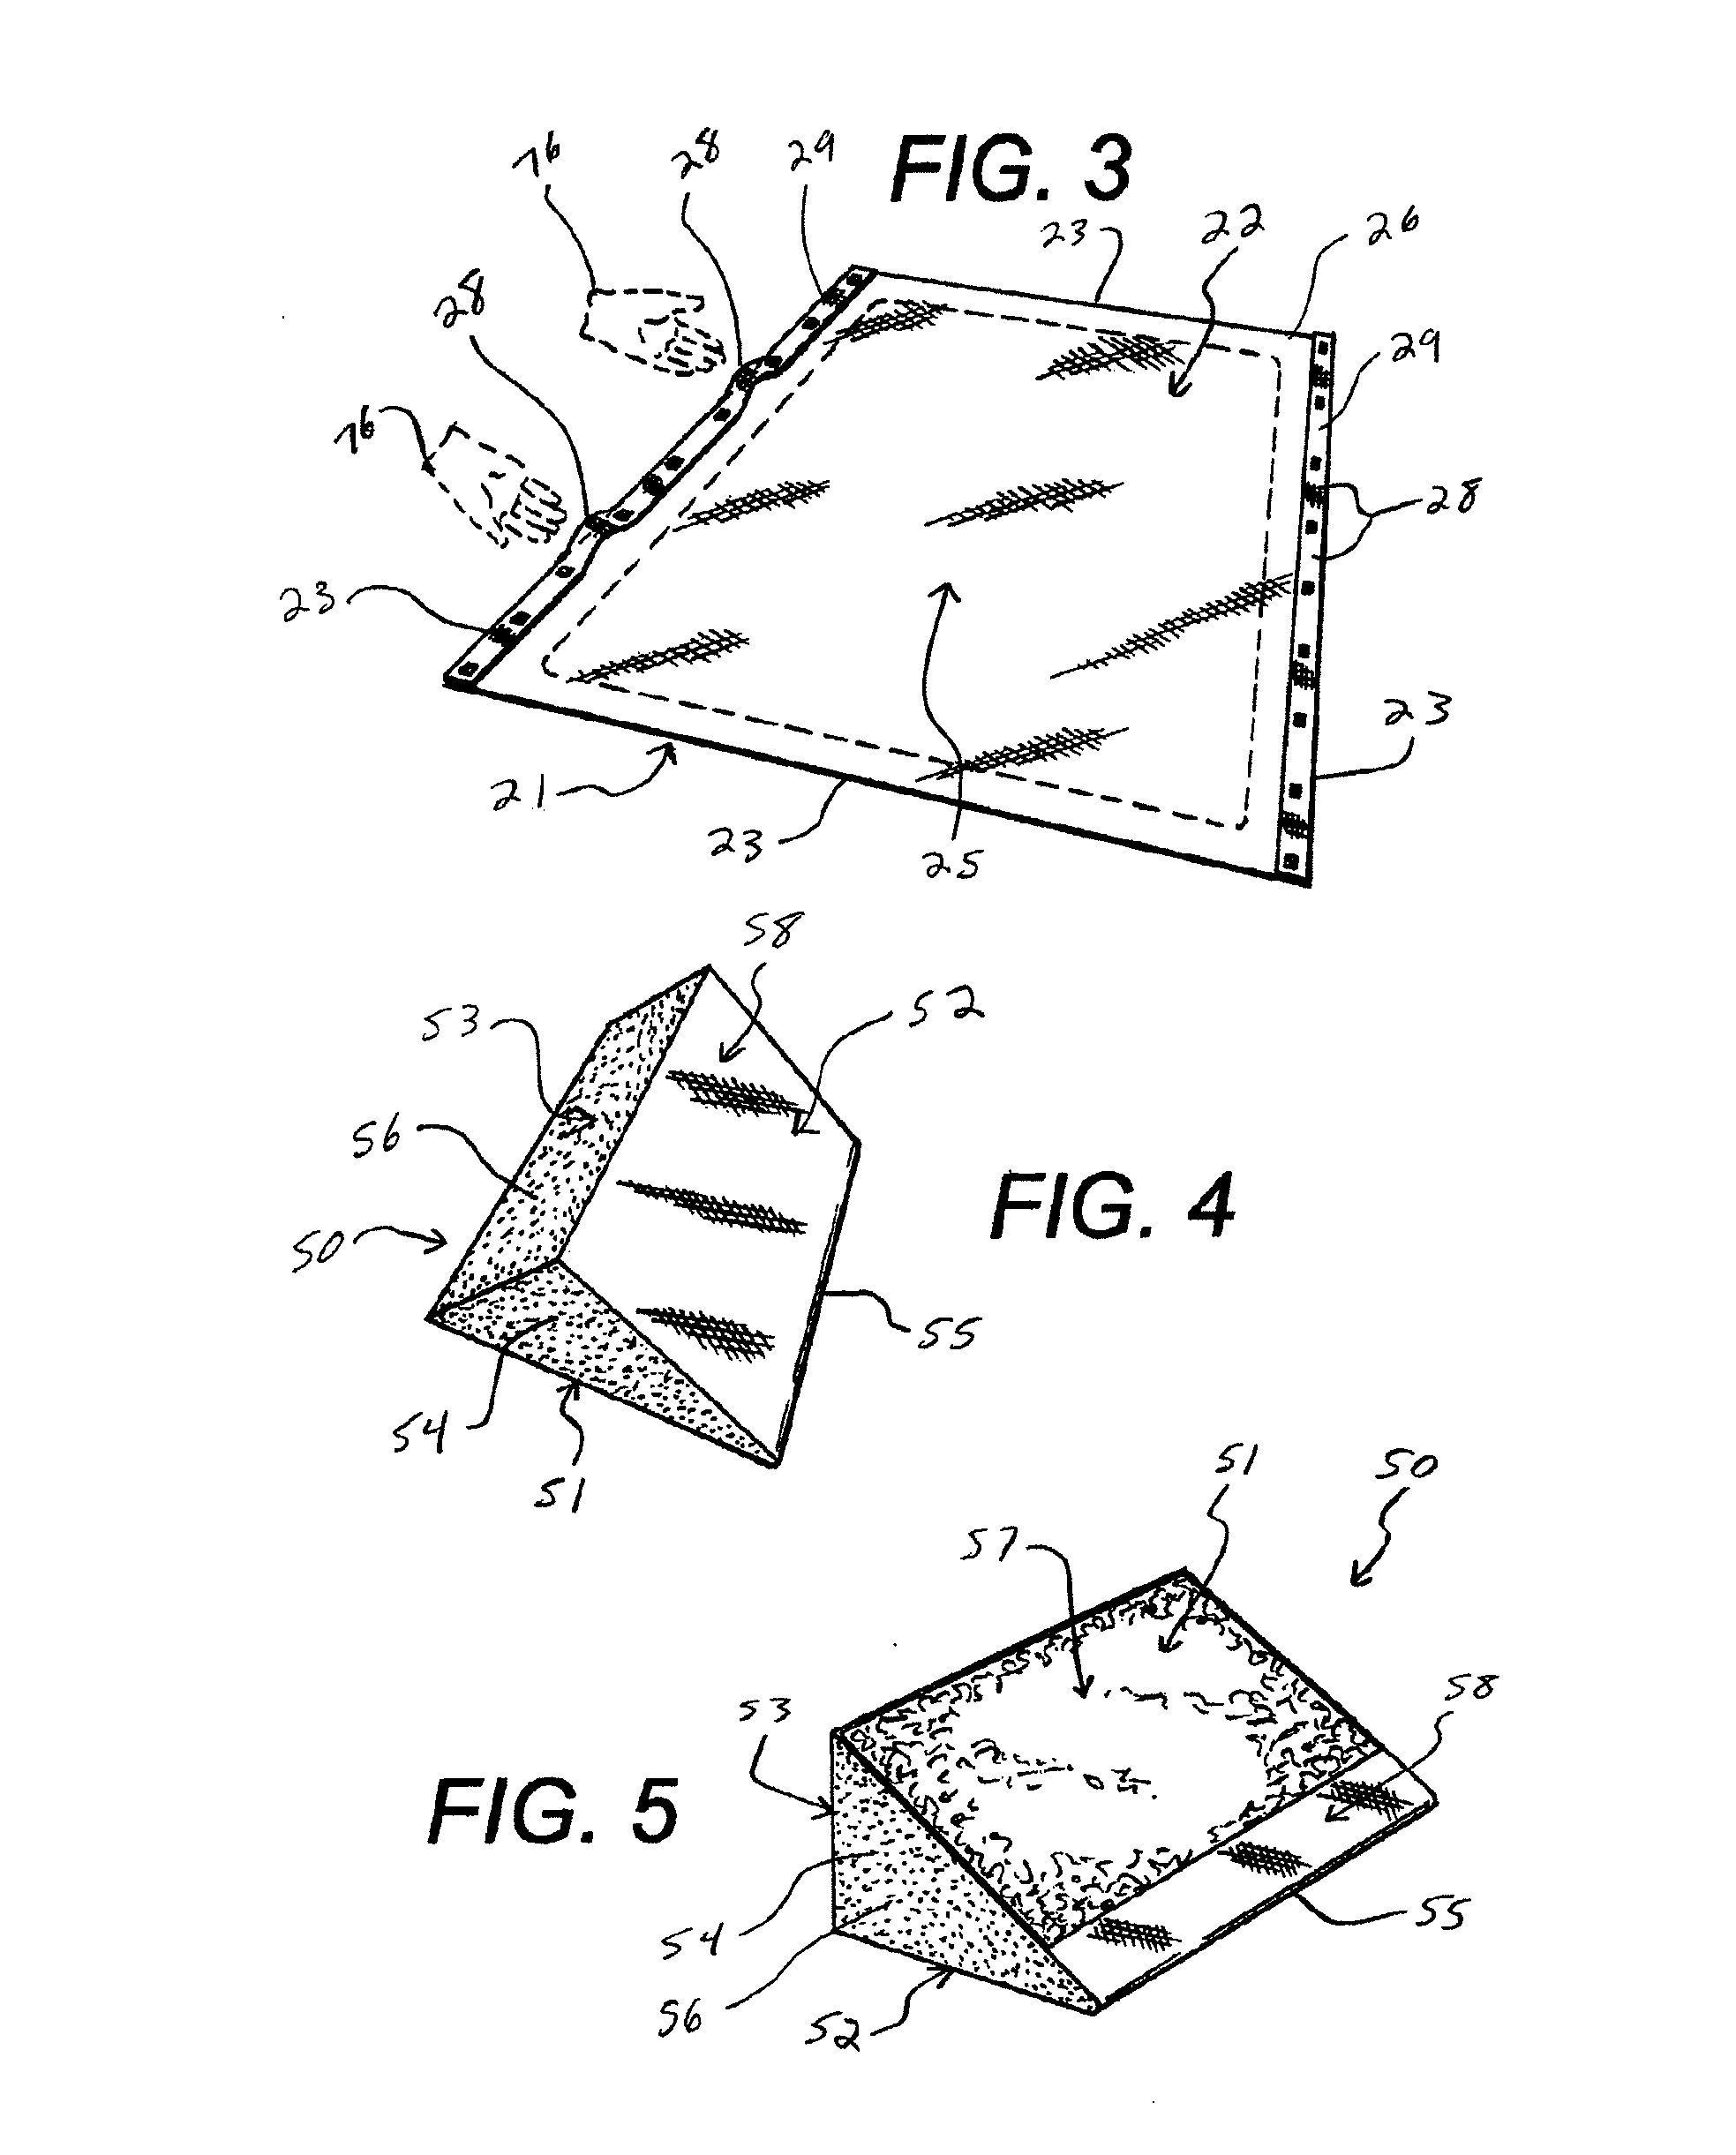 Method for turning and positioning a patient